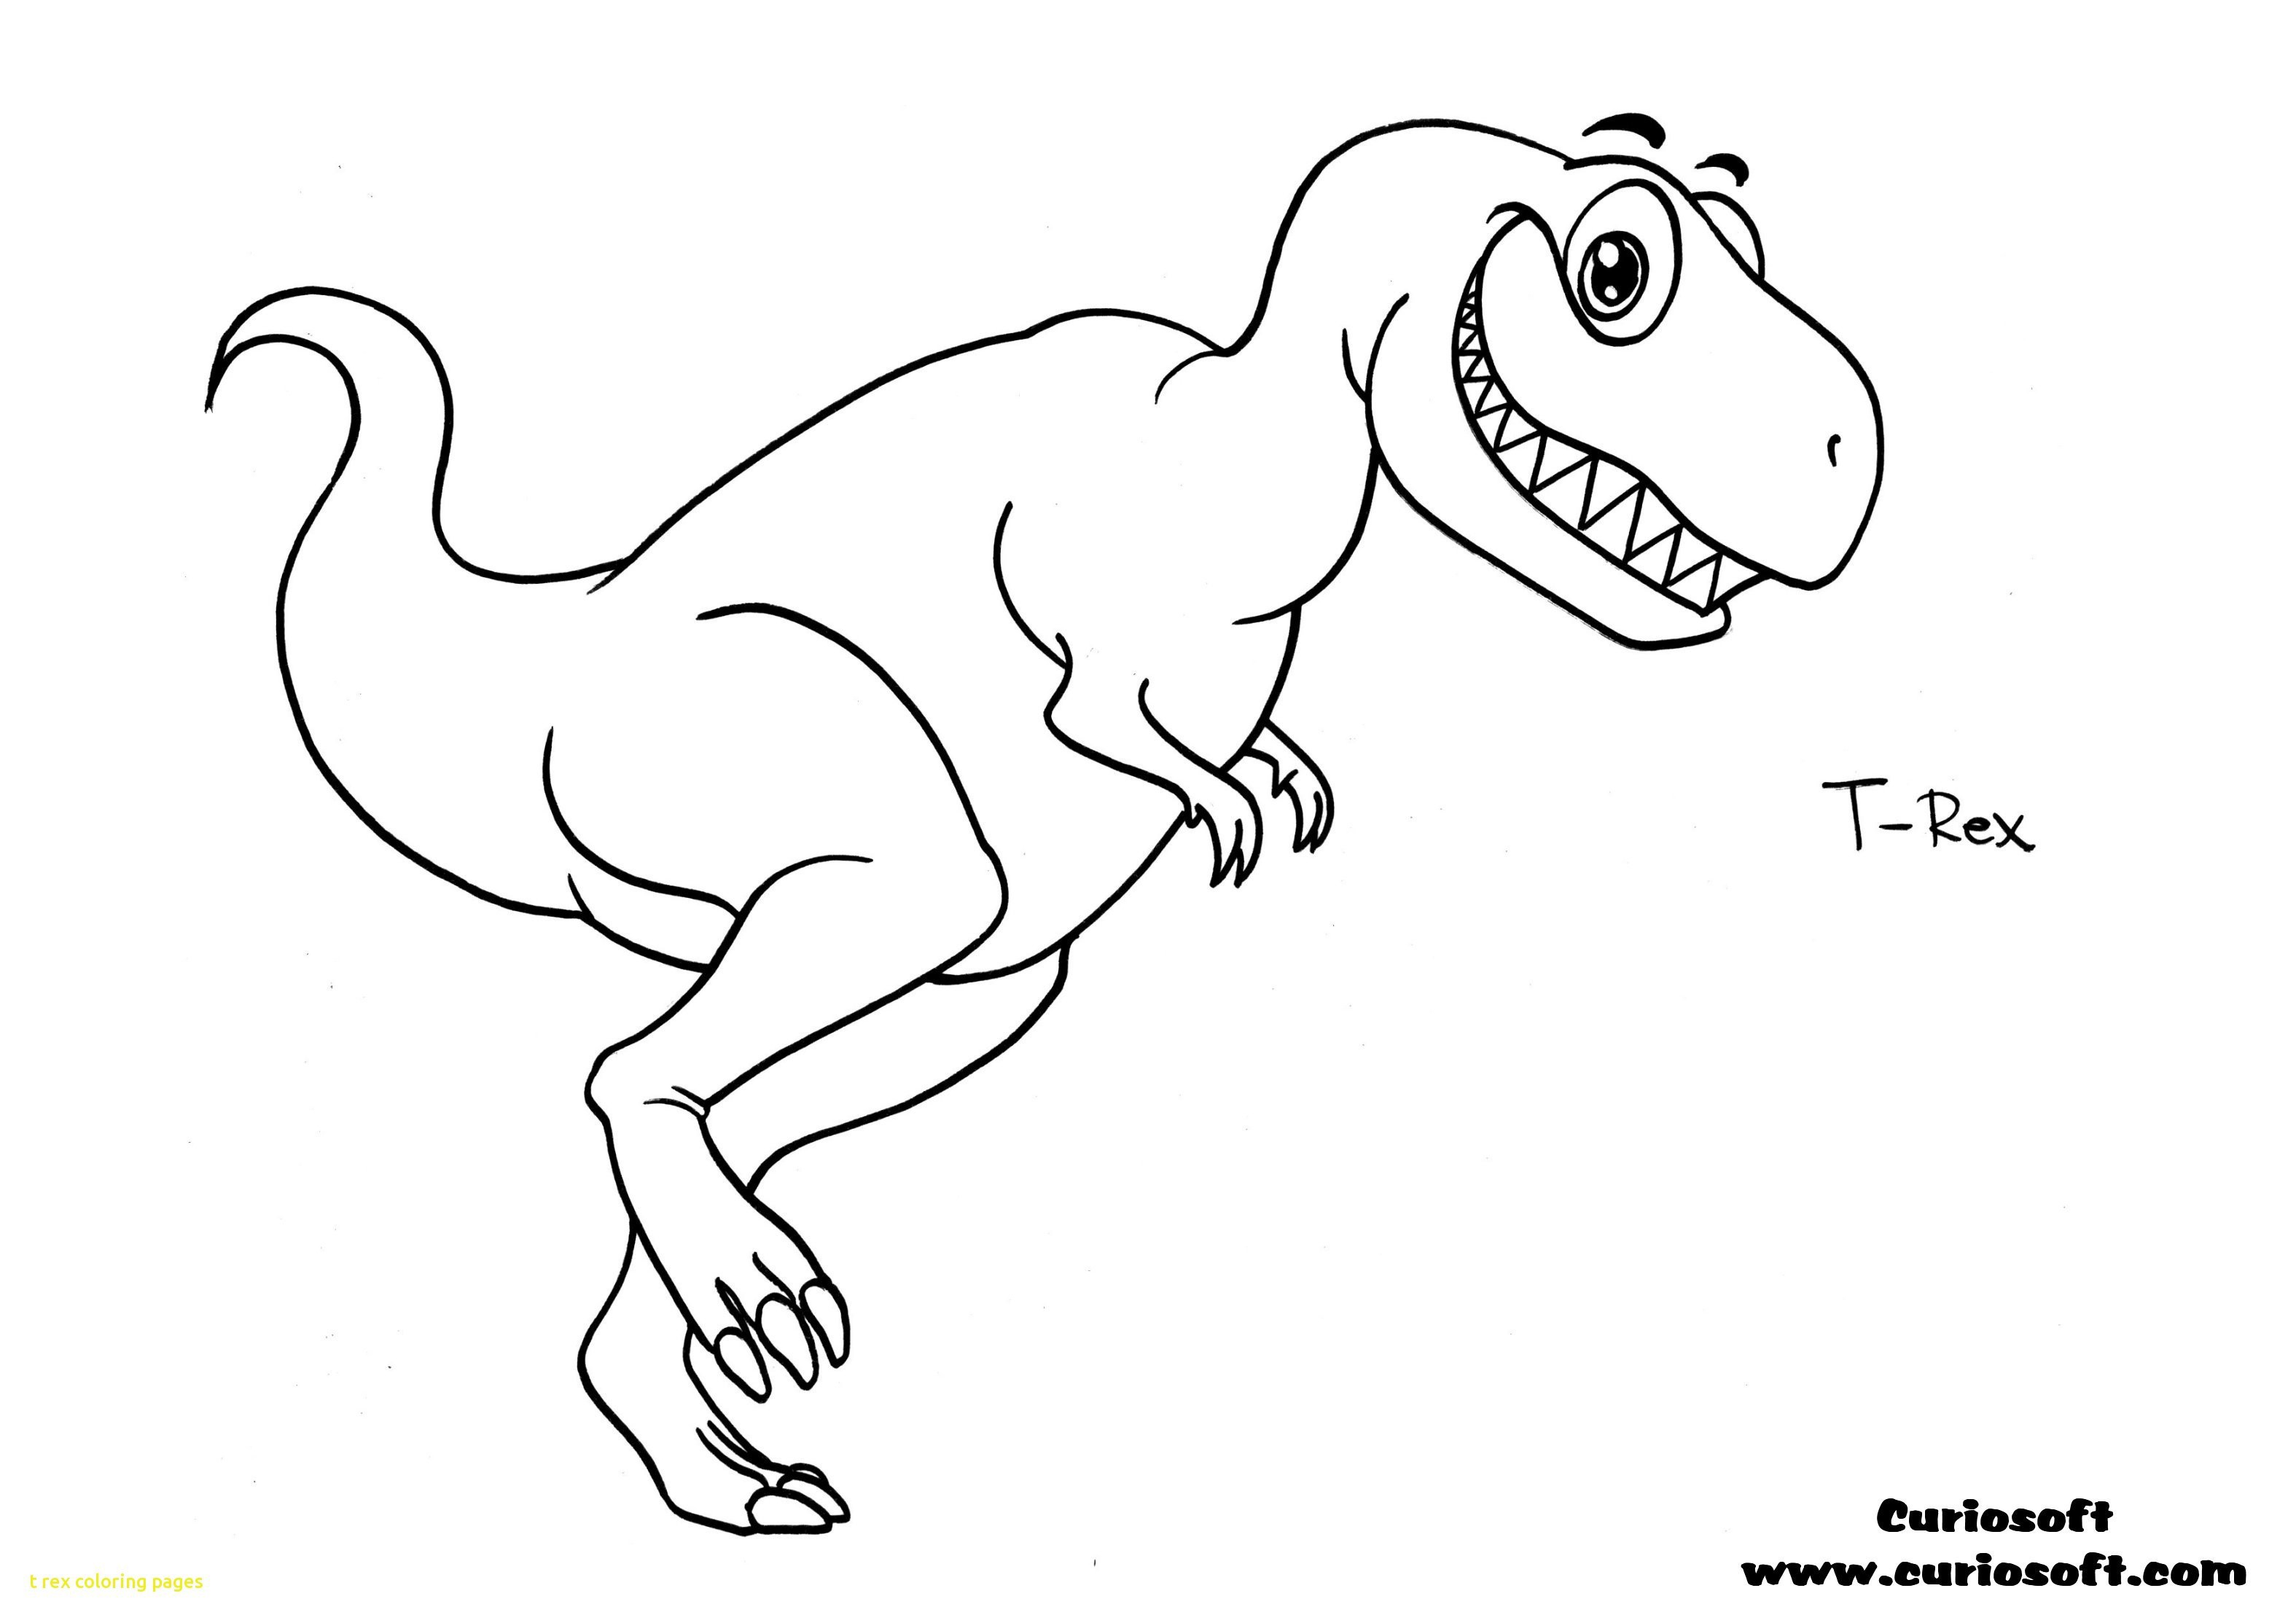 T Rex Coloring Pages for Preschoolers Wallpaper